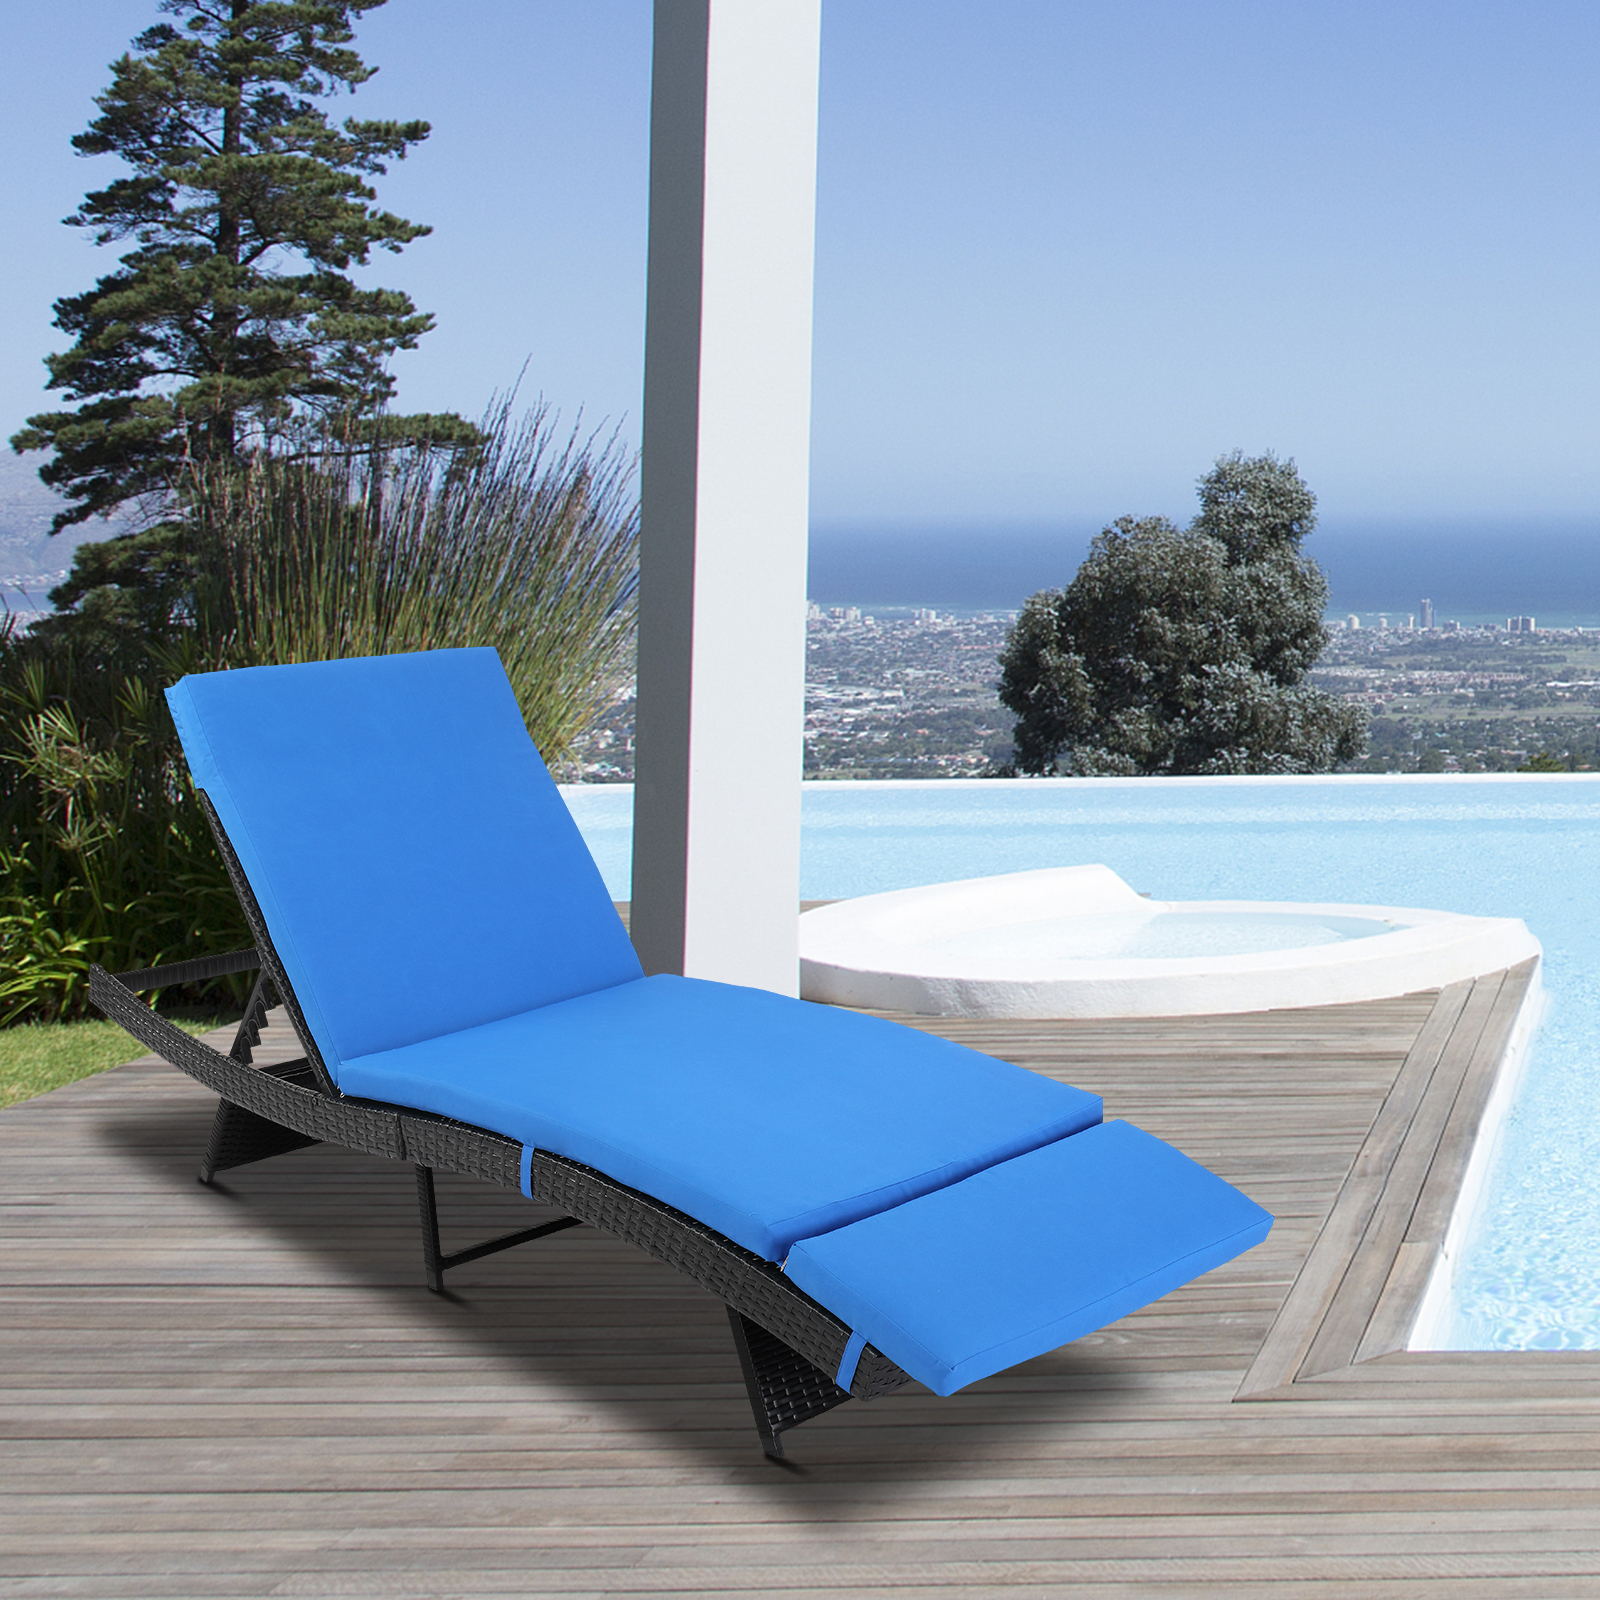 Seizeen Chaise Lounge Outdoor, Patio Rattan Lounge Chair 6-Position Adjustable, Poolside Sun Recliner Cushioned, Blue Cushions - image 2 of 11